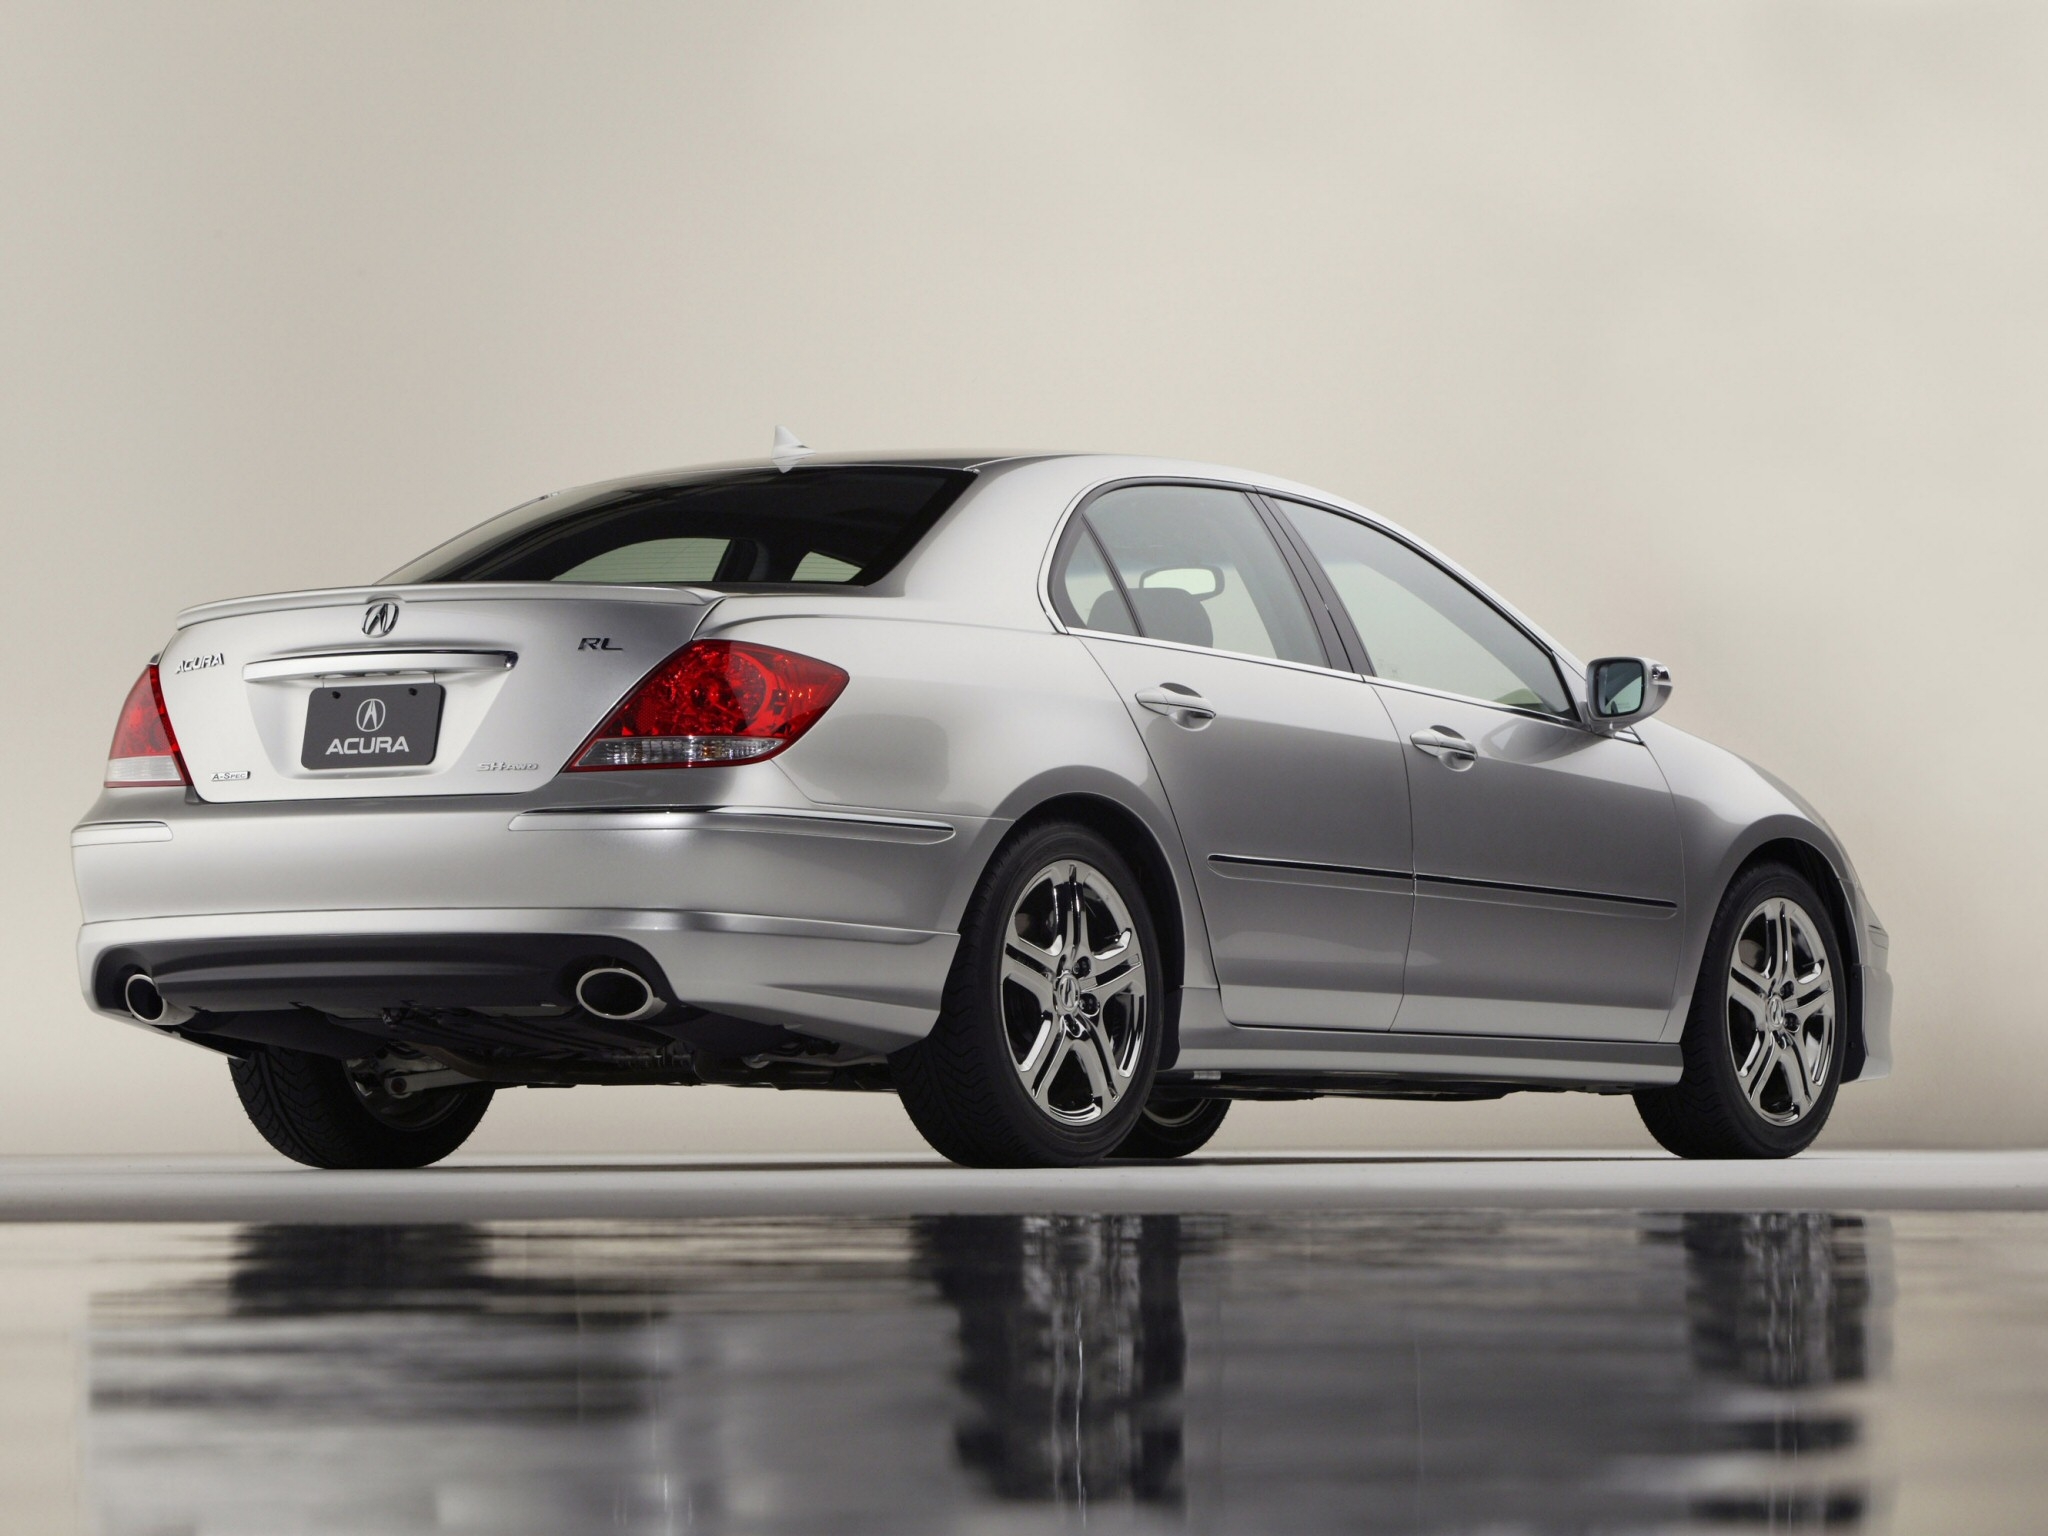 auto, water, acura, cars, reflection, back view, rear view, style, akura, silver metallic, rl, a spec QHD